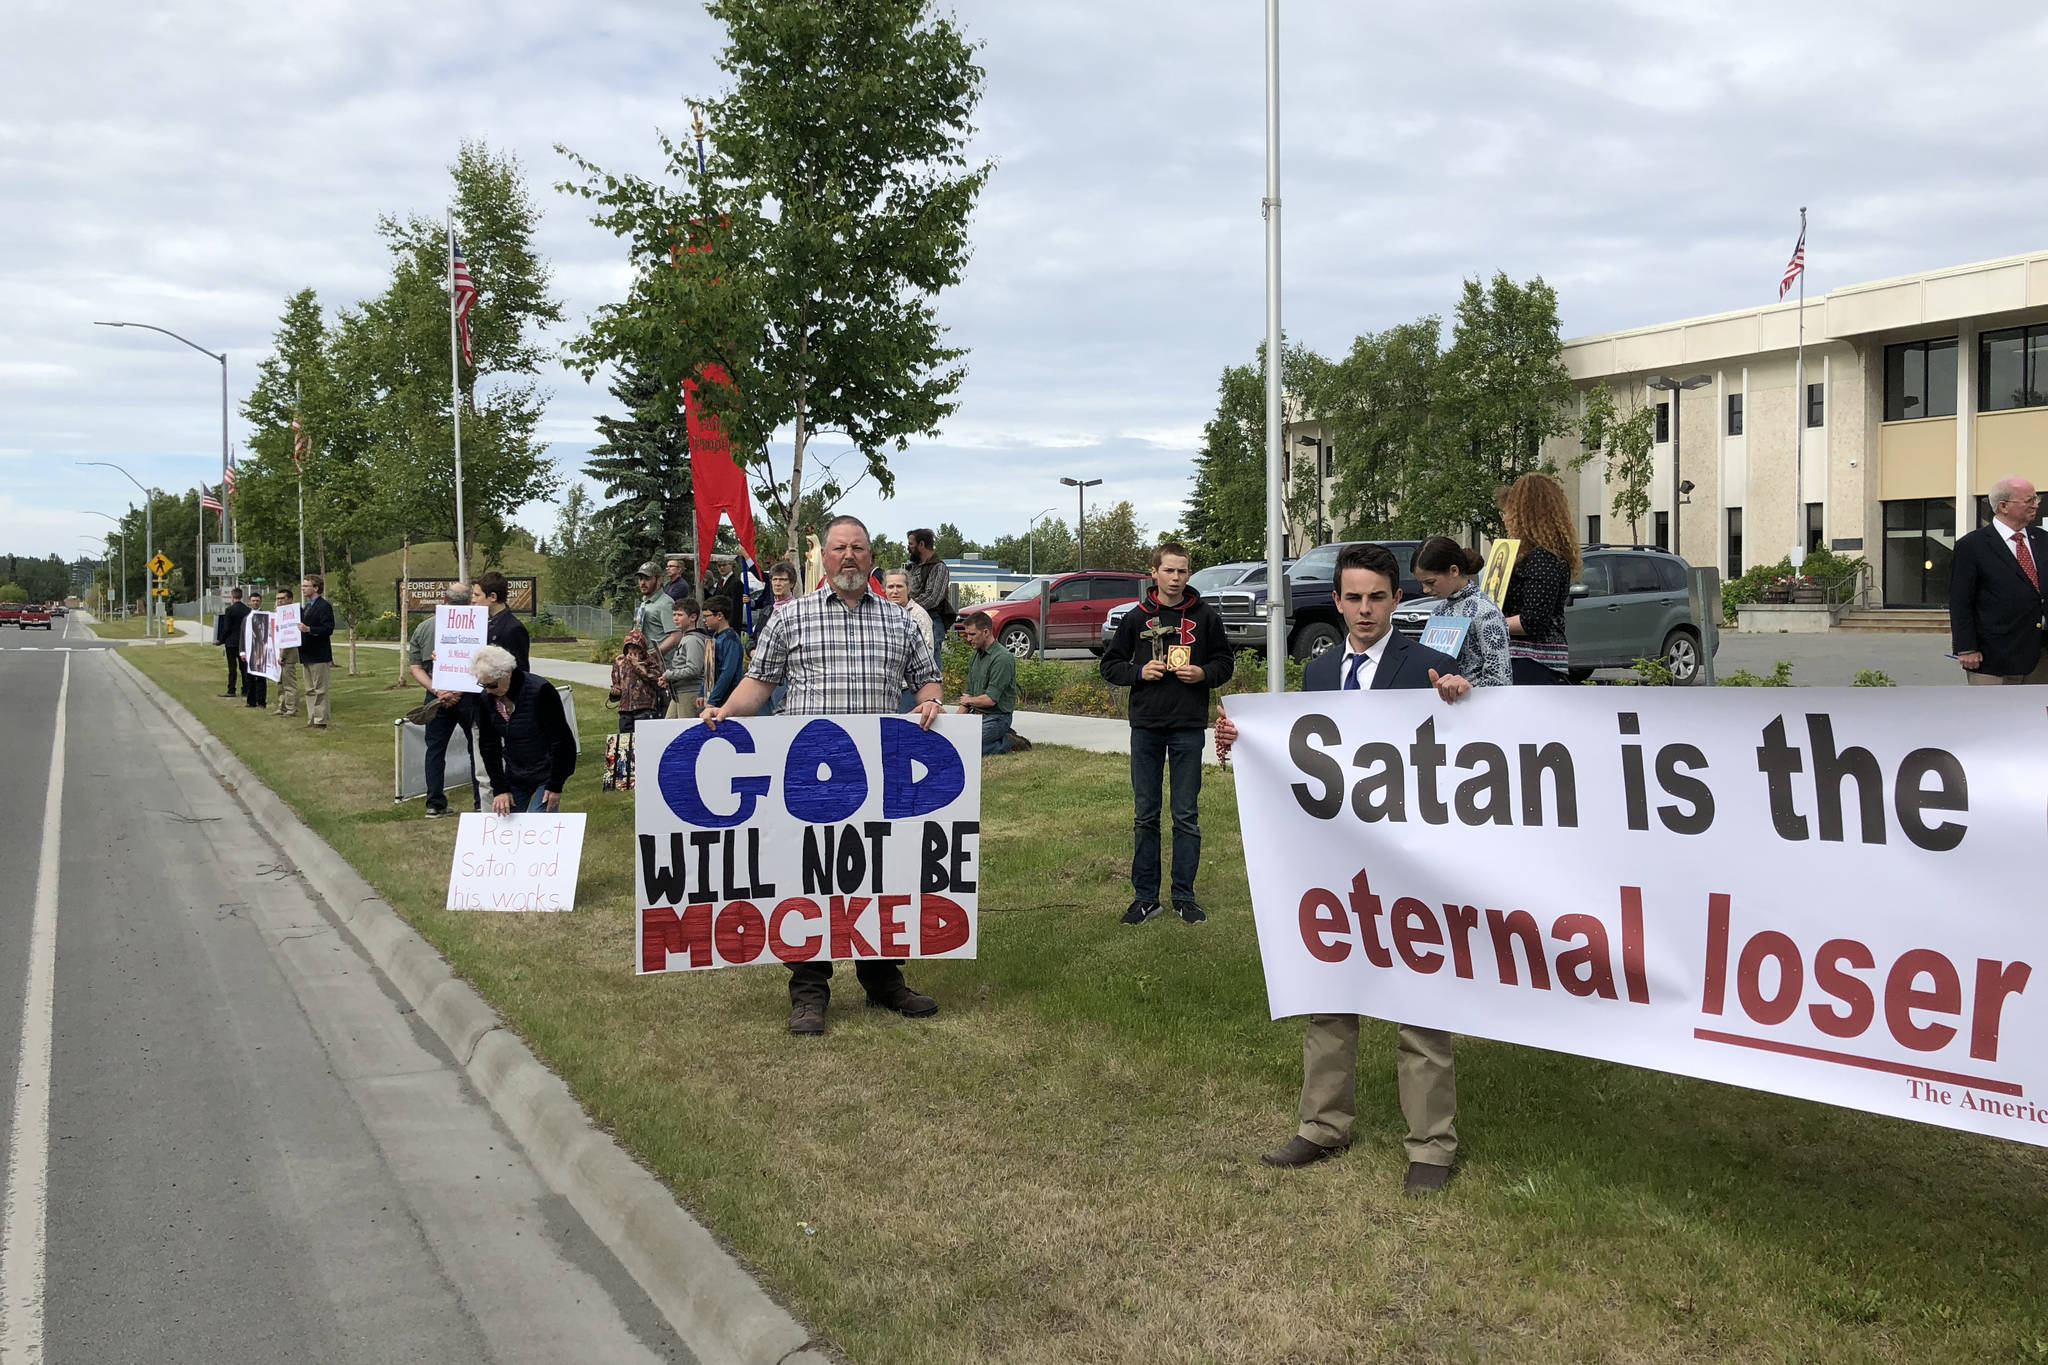 Satanic Temple invocation prompts protest, walkouts at assembly meeting